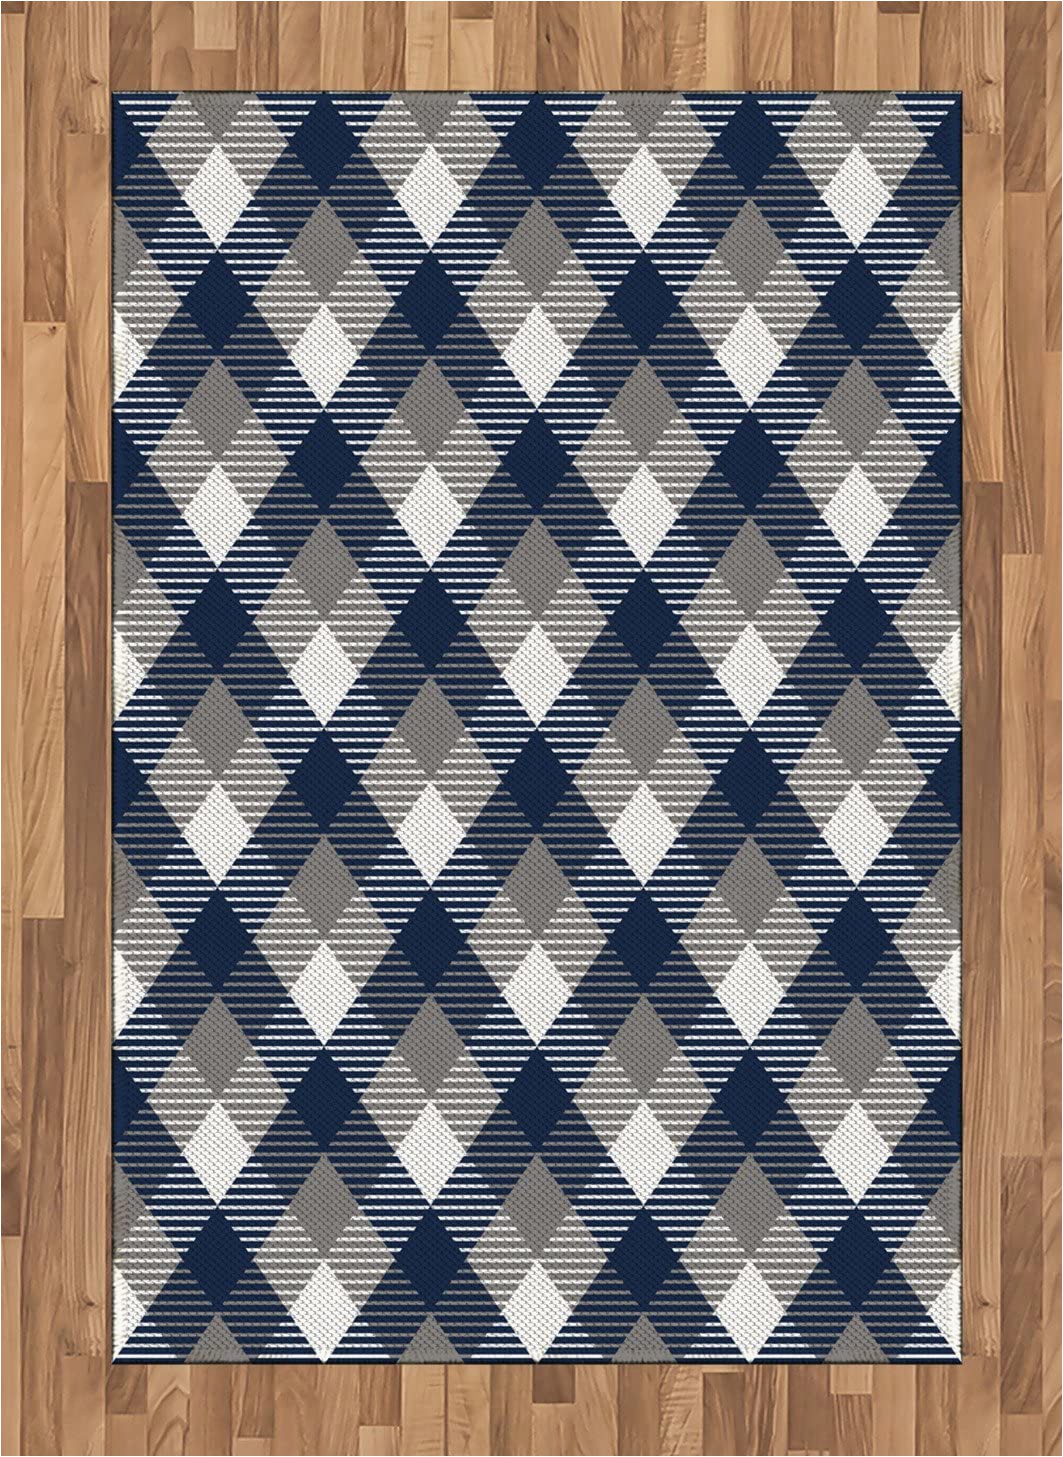 Blue and White Check Rug Amazon Ambesonne Navy area Rug Abstract Checkered